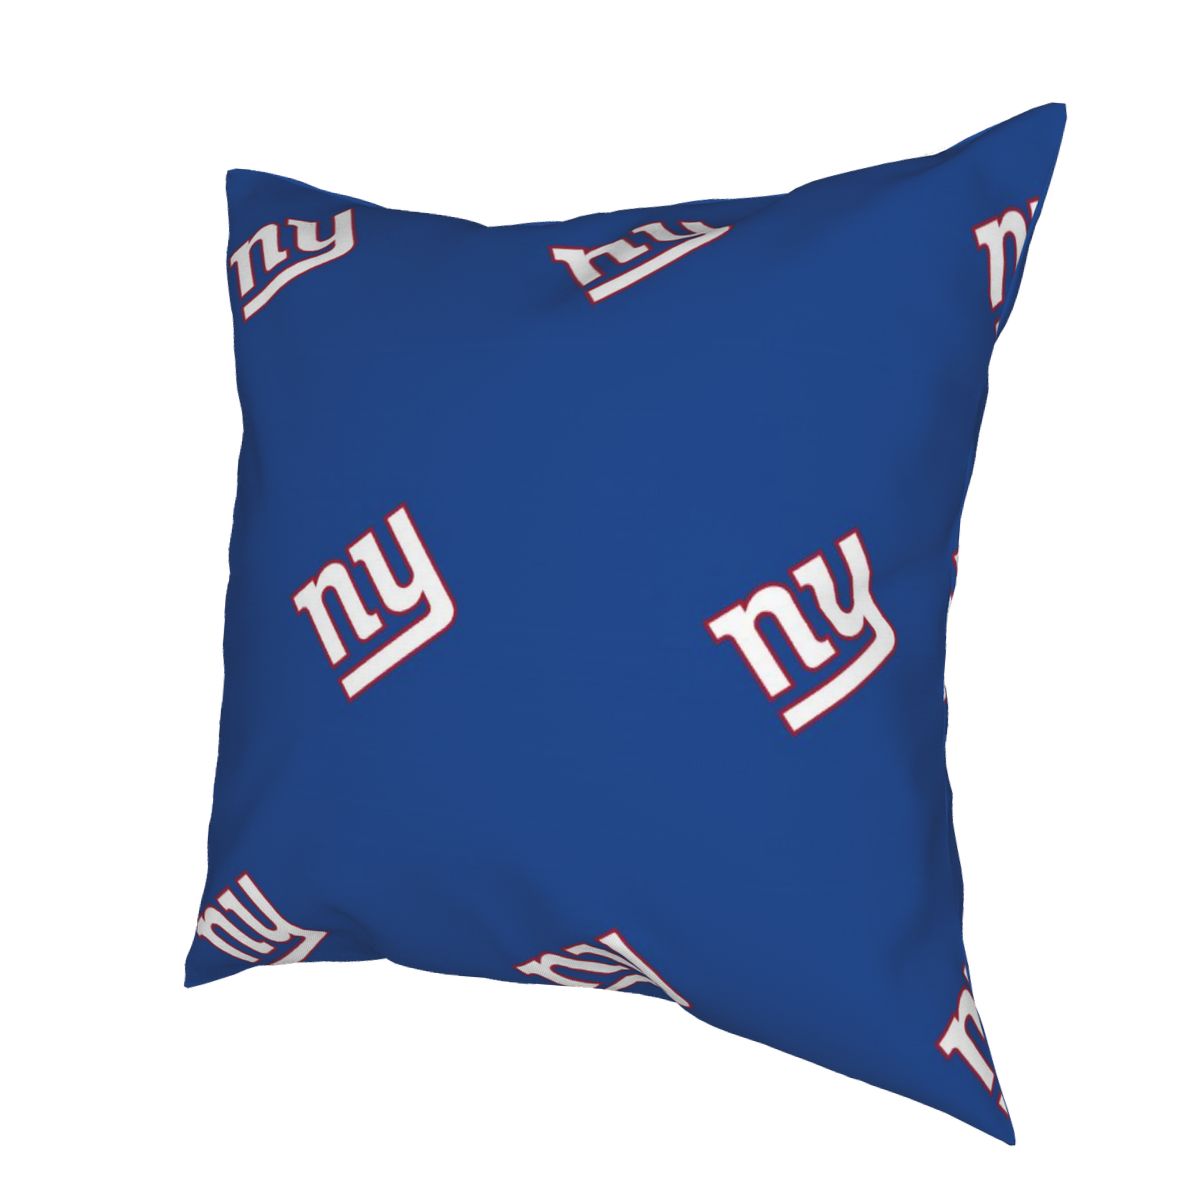 Custom Decorative Football Pillow Case New York Giants Pillowcase Personalized Throw Pillow Covers